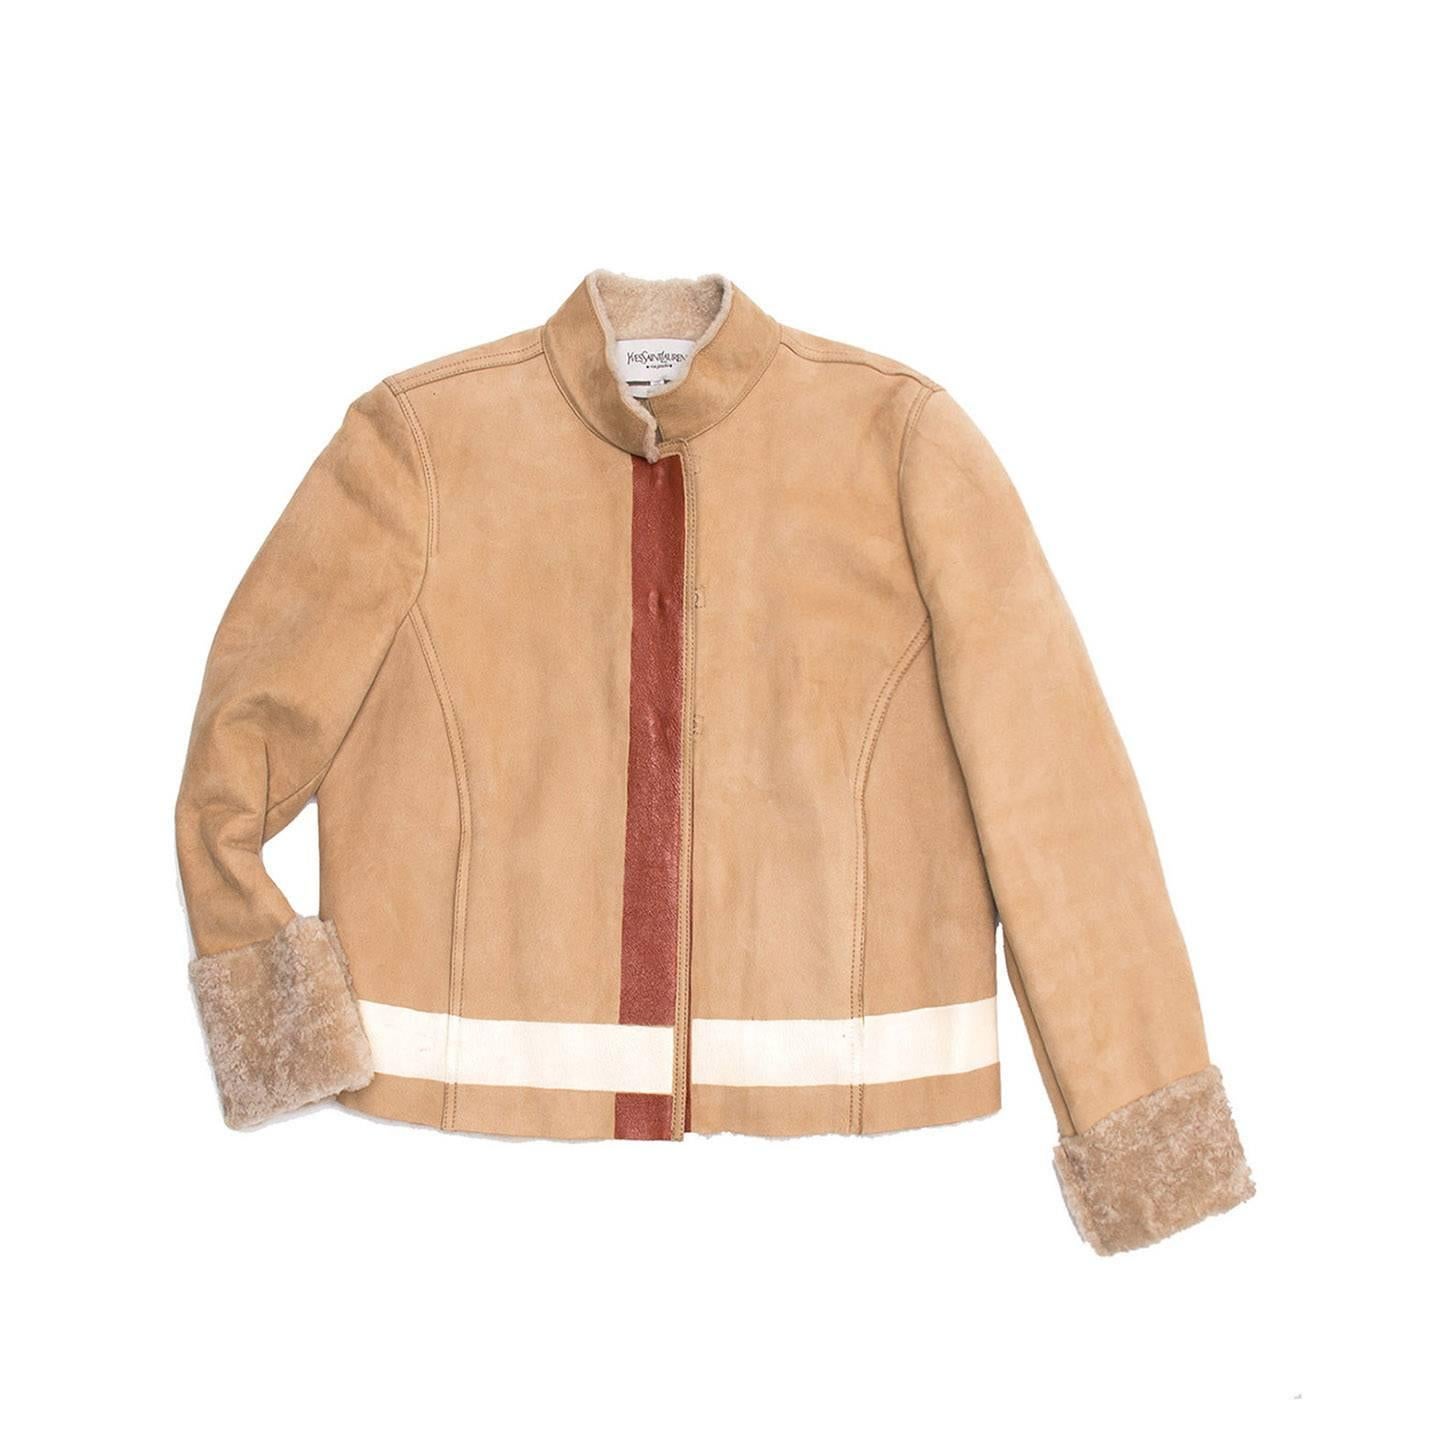 Tan suede shearling lined racer style jacket with hand painted orange/ivory striped detailing on cuff, waist and front closing. Jacket closure is with hook and eye detailing. 

Size  40 French sizing

Condition  Excellent: worn a couple of times